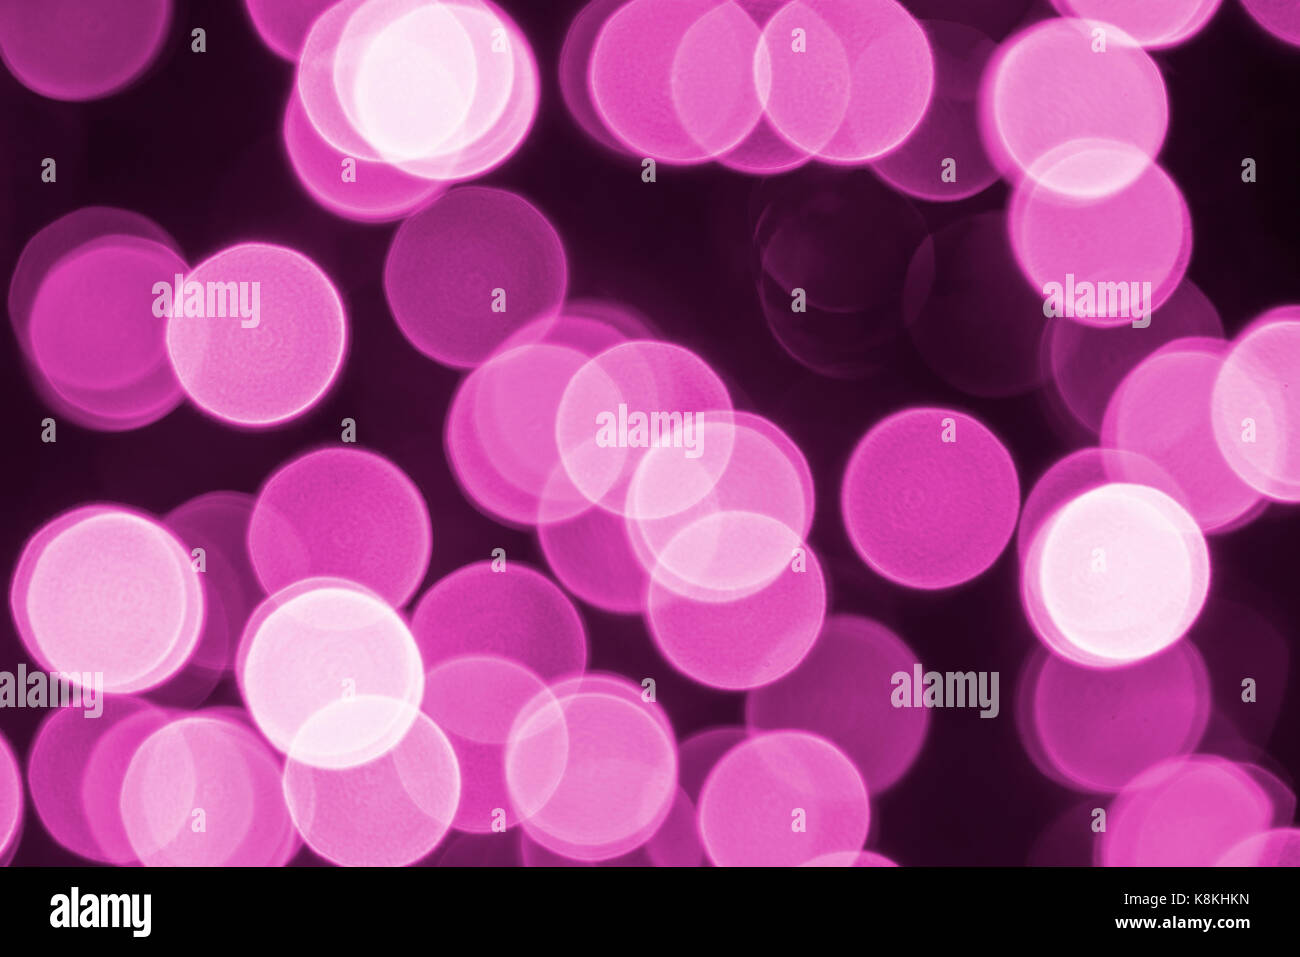 Pink Retro Lights Background, Party, Celebration Or Christmas Texture Stock Photo